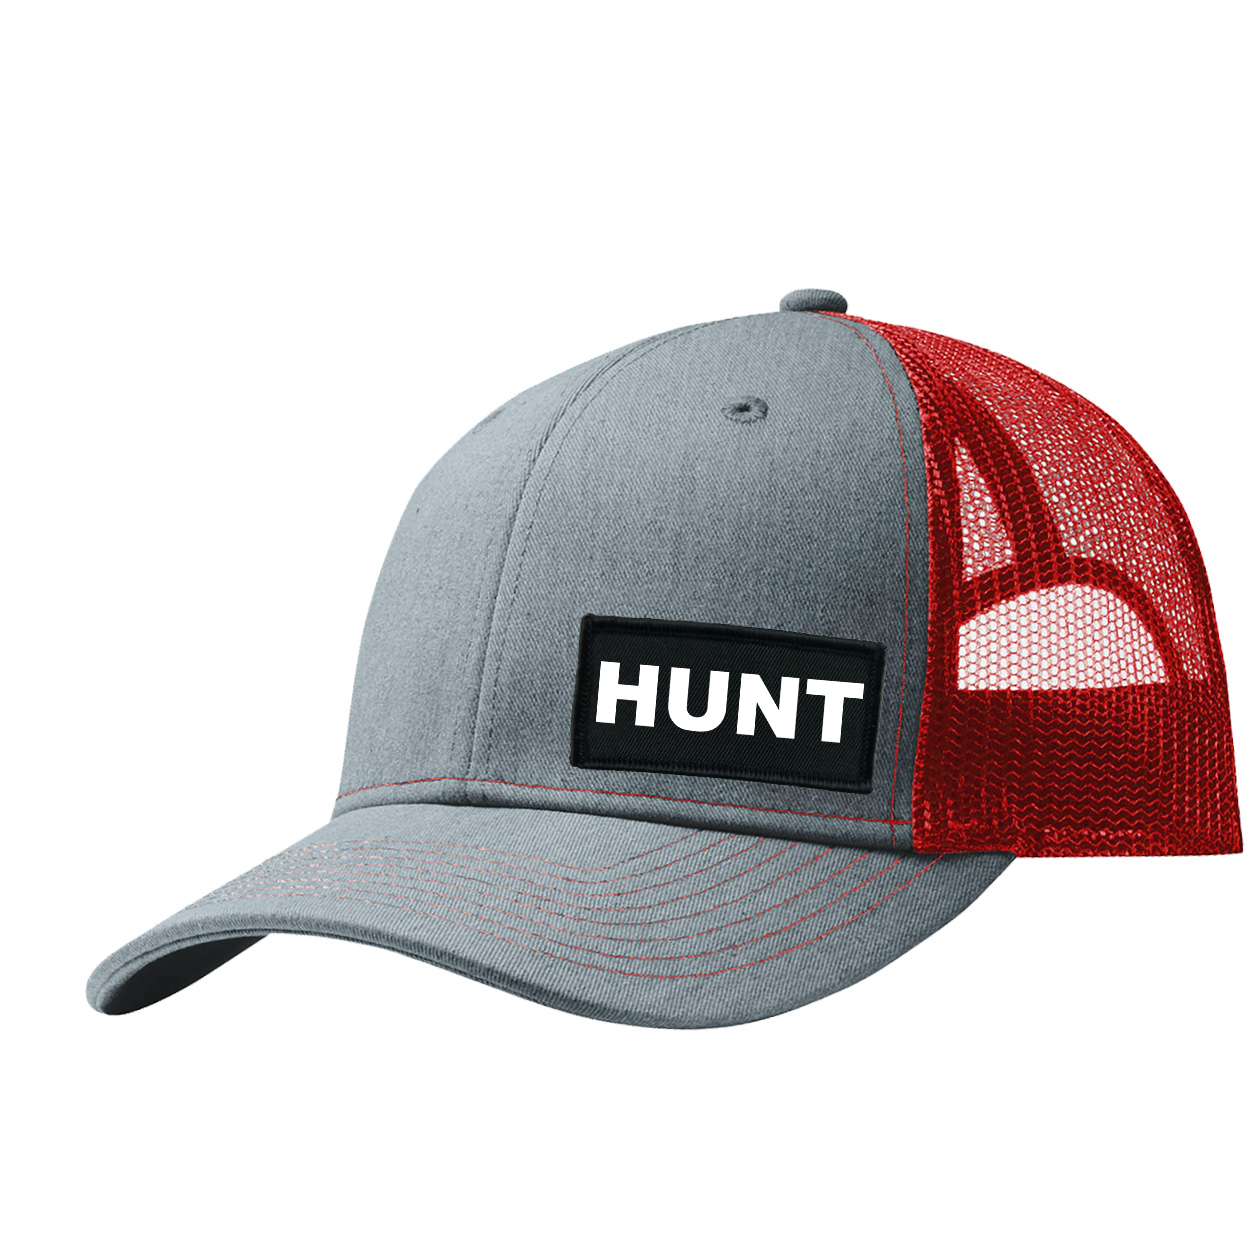 Hunt Brand Logo Night Out Woven Patch Snapback Trucker Hat Heather Heather Grey/Red (White Logo)